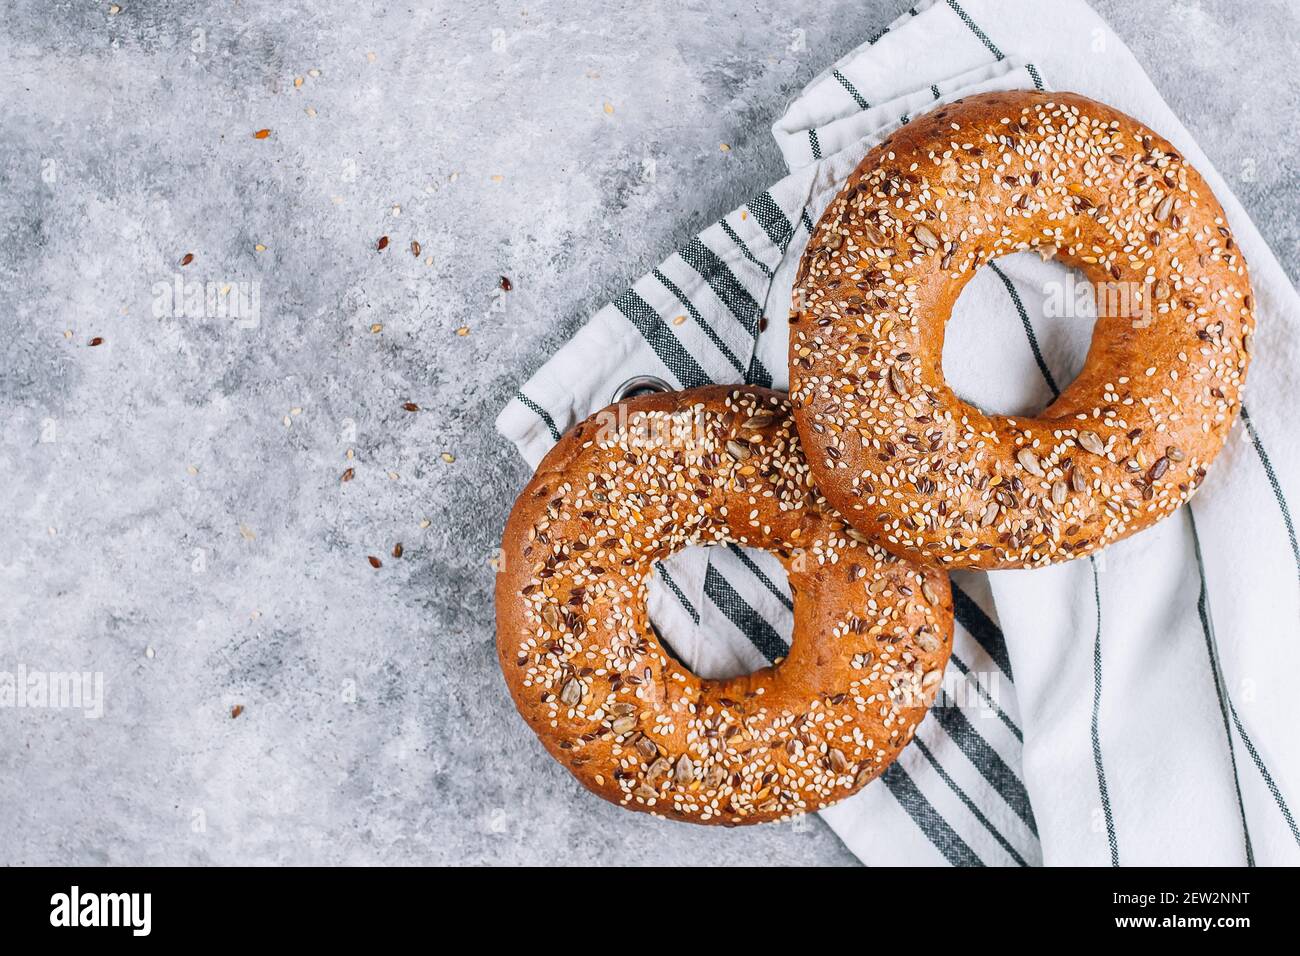 Healthy organic whole grain bagel on concrete background table. Breakfast bread. Copy space, top view Stock Photo